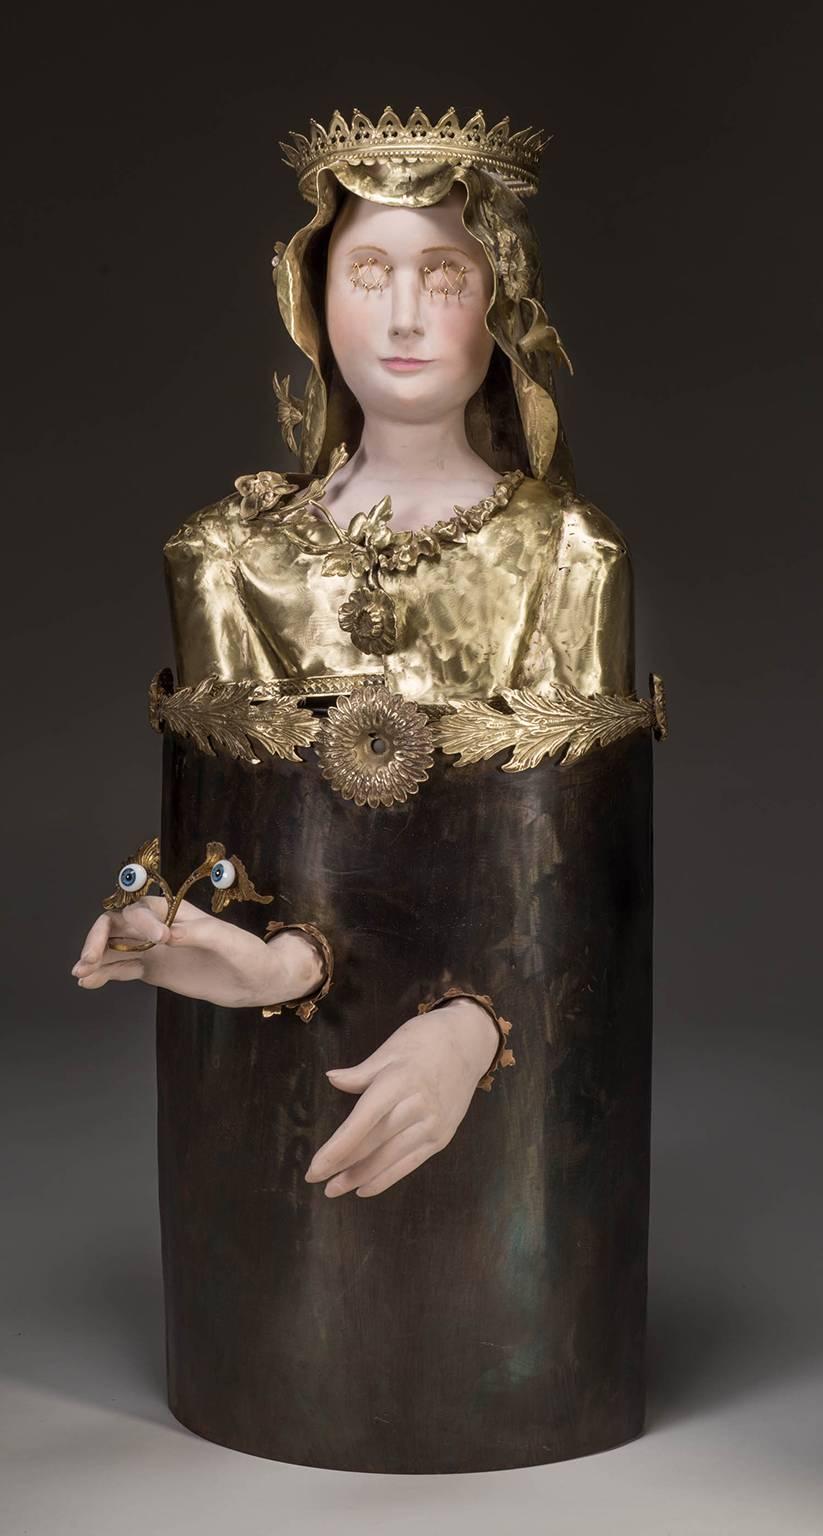 Lannie Hart Figurative Sculpture - "St Lucia", with golden ornamented costume and crown 